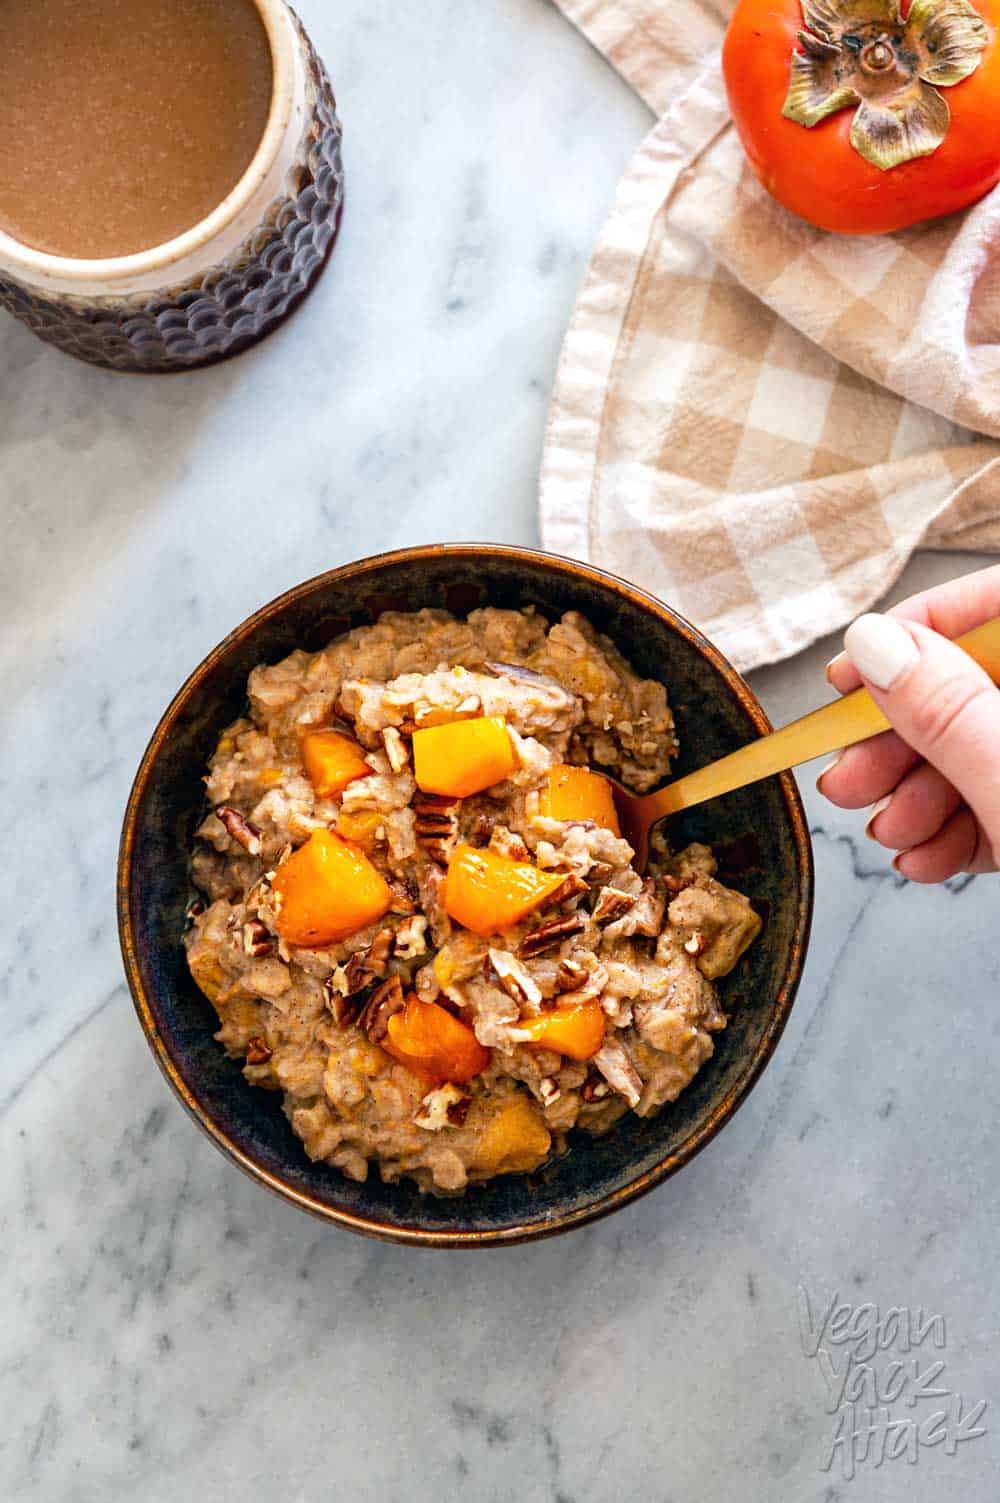 Ceramic bowl filled with persimmon oatmeal, and golden spoon, with a cup of coffee